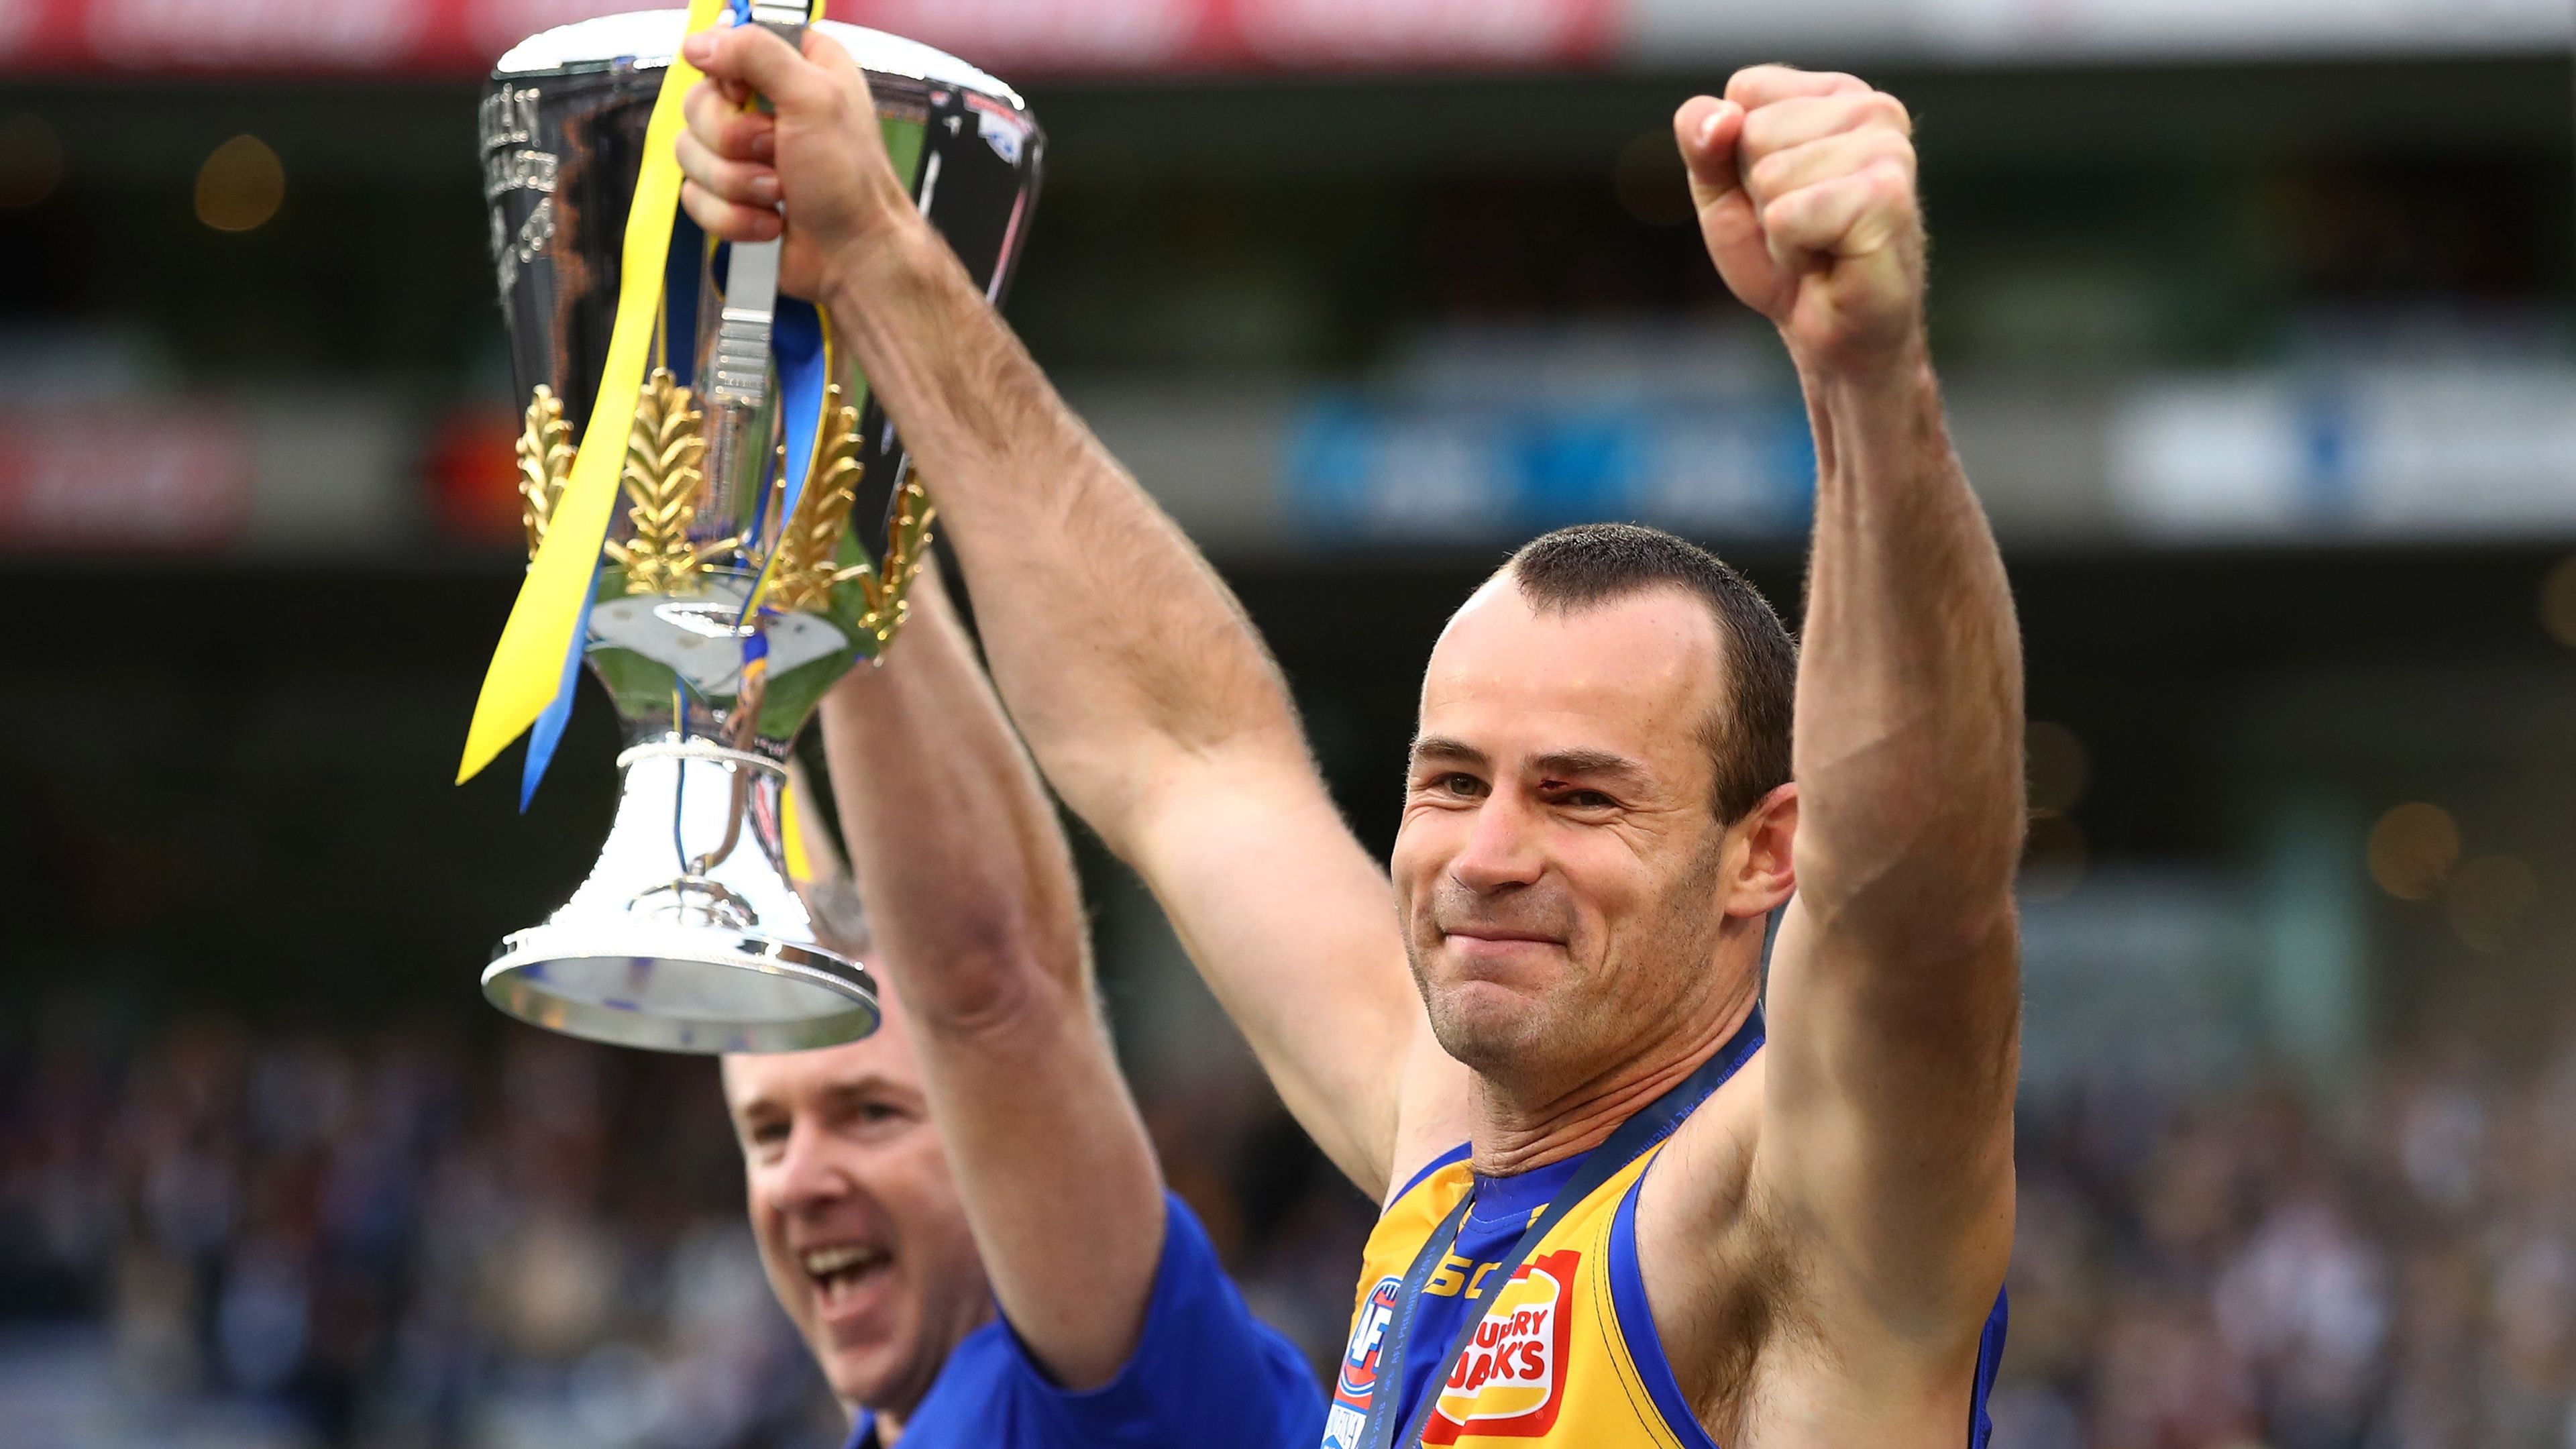 'You can't go on forever': West Coast premiership captain Shannon Hurn to retire at season's end